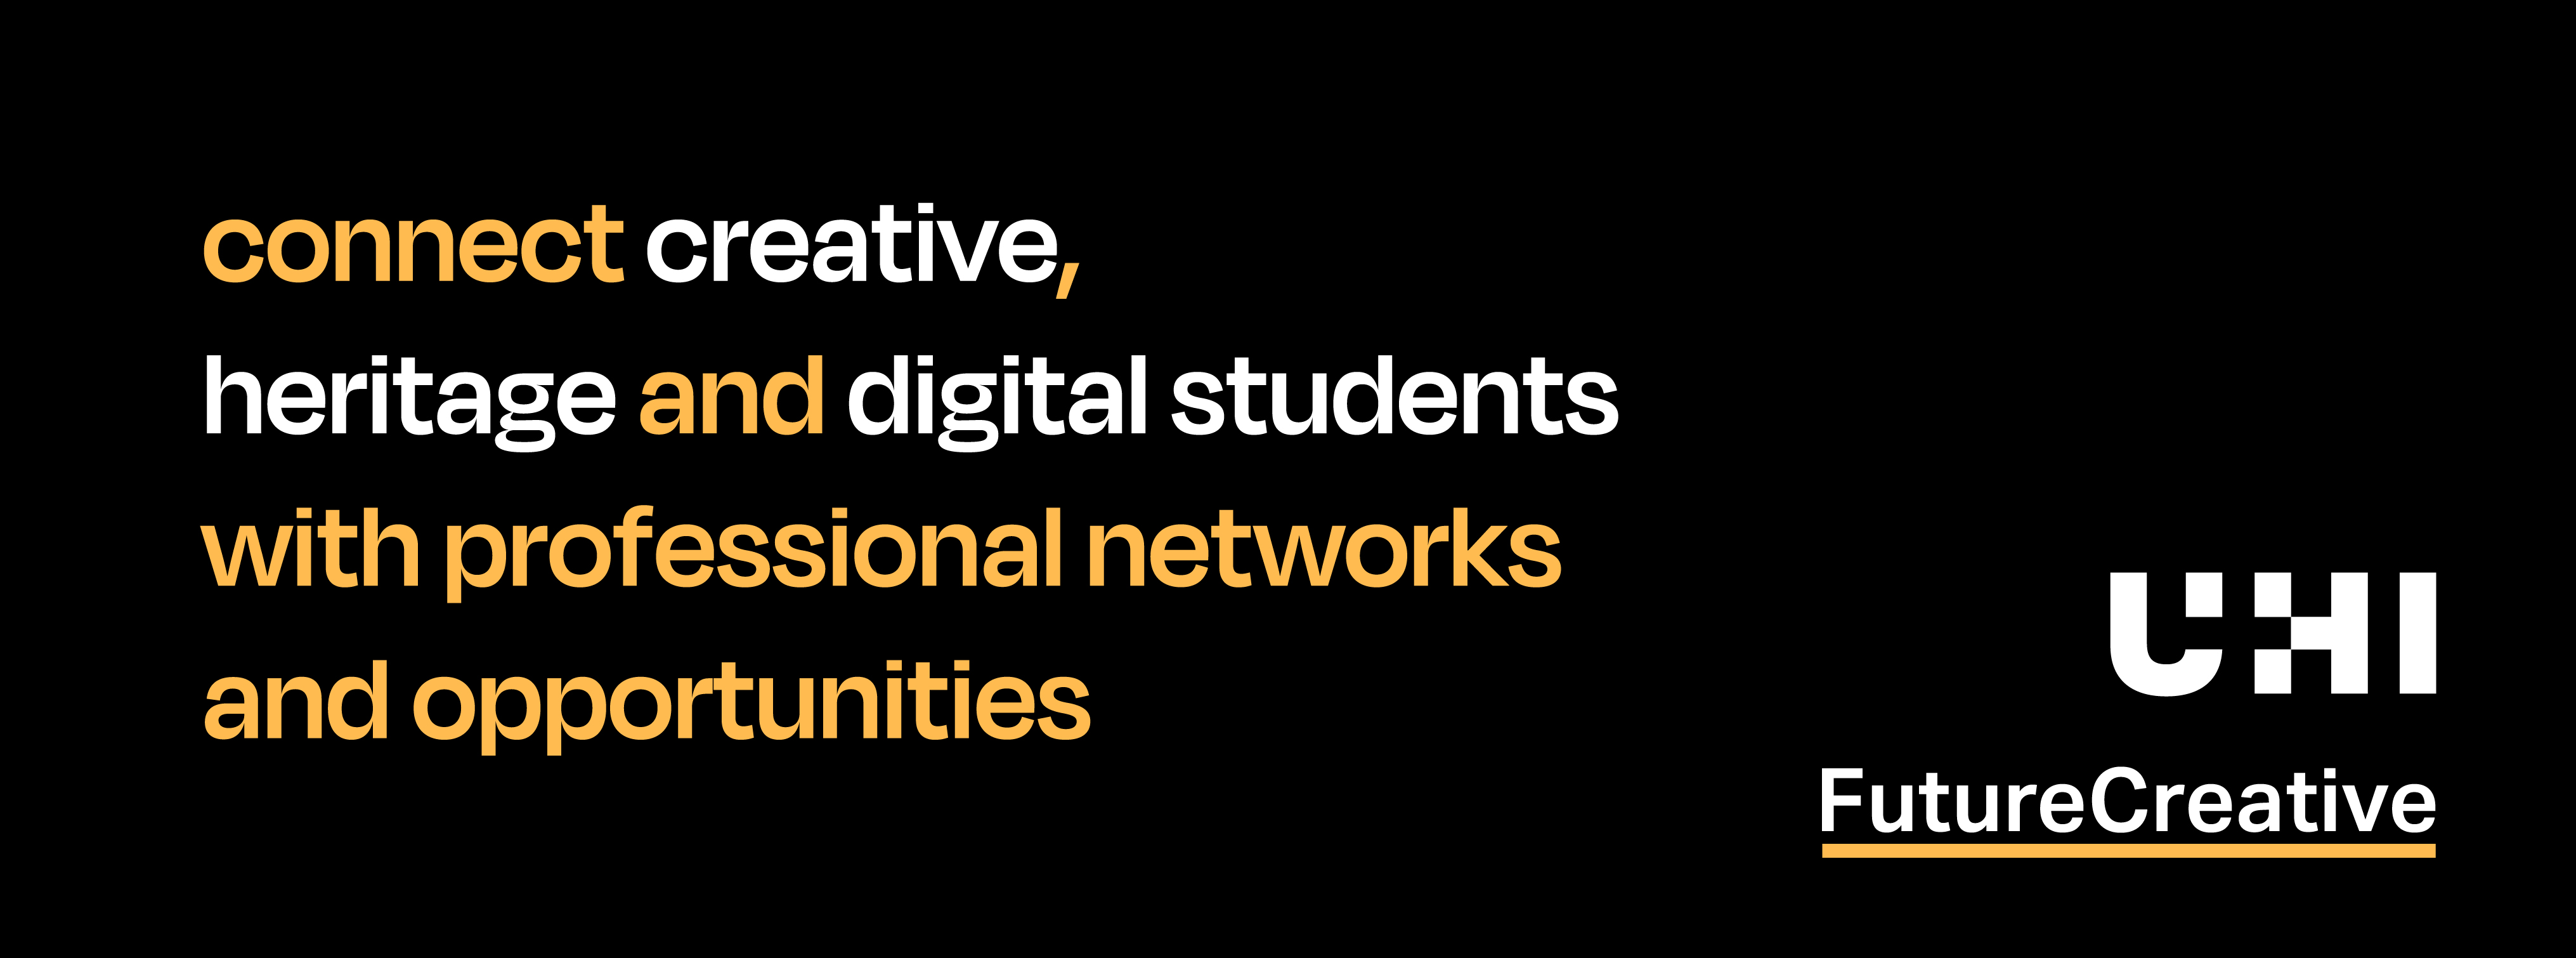 Connect creative heritage and digital students with professional networks and opportunities | UHI Future Creative